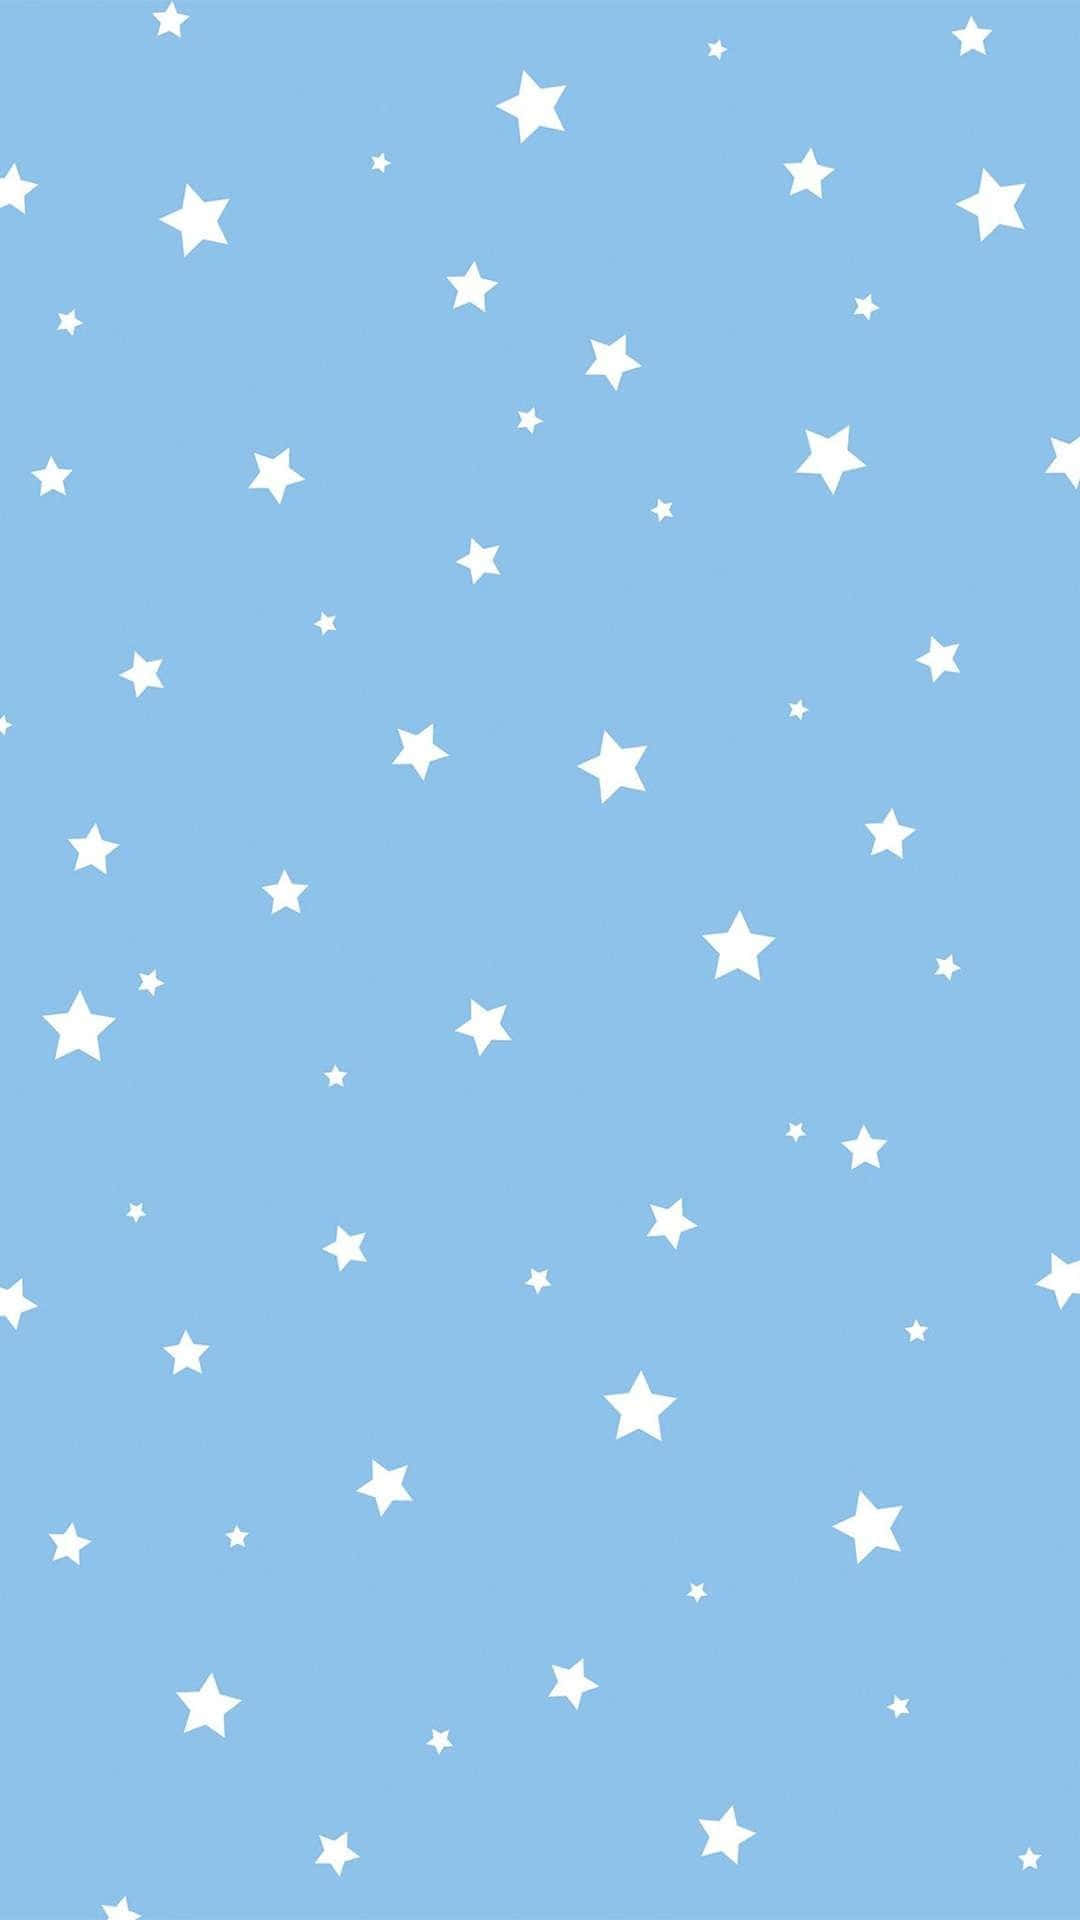 A vibrant blue star shining atop a textured background.